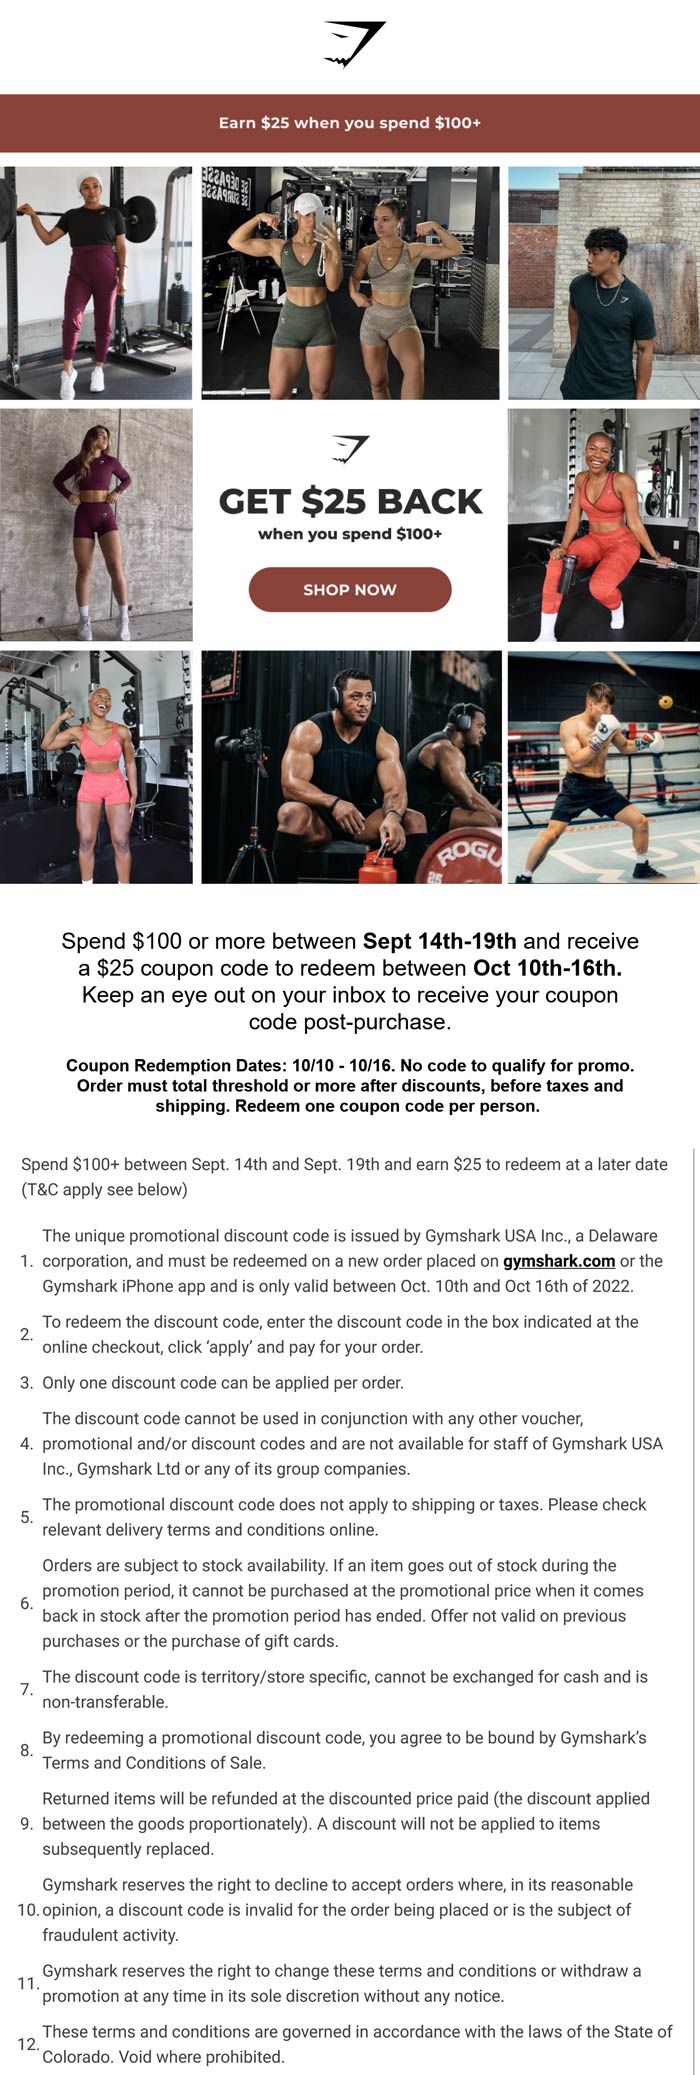 Gymshark coupons & promo code for [December 2022]